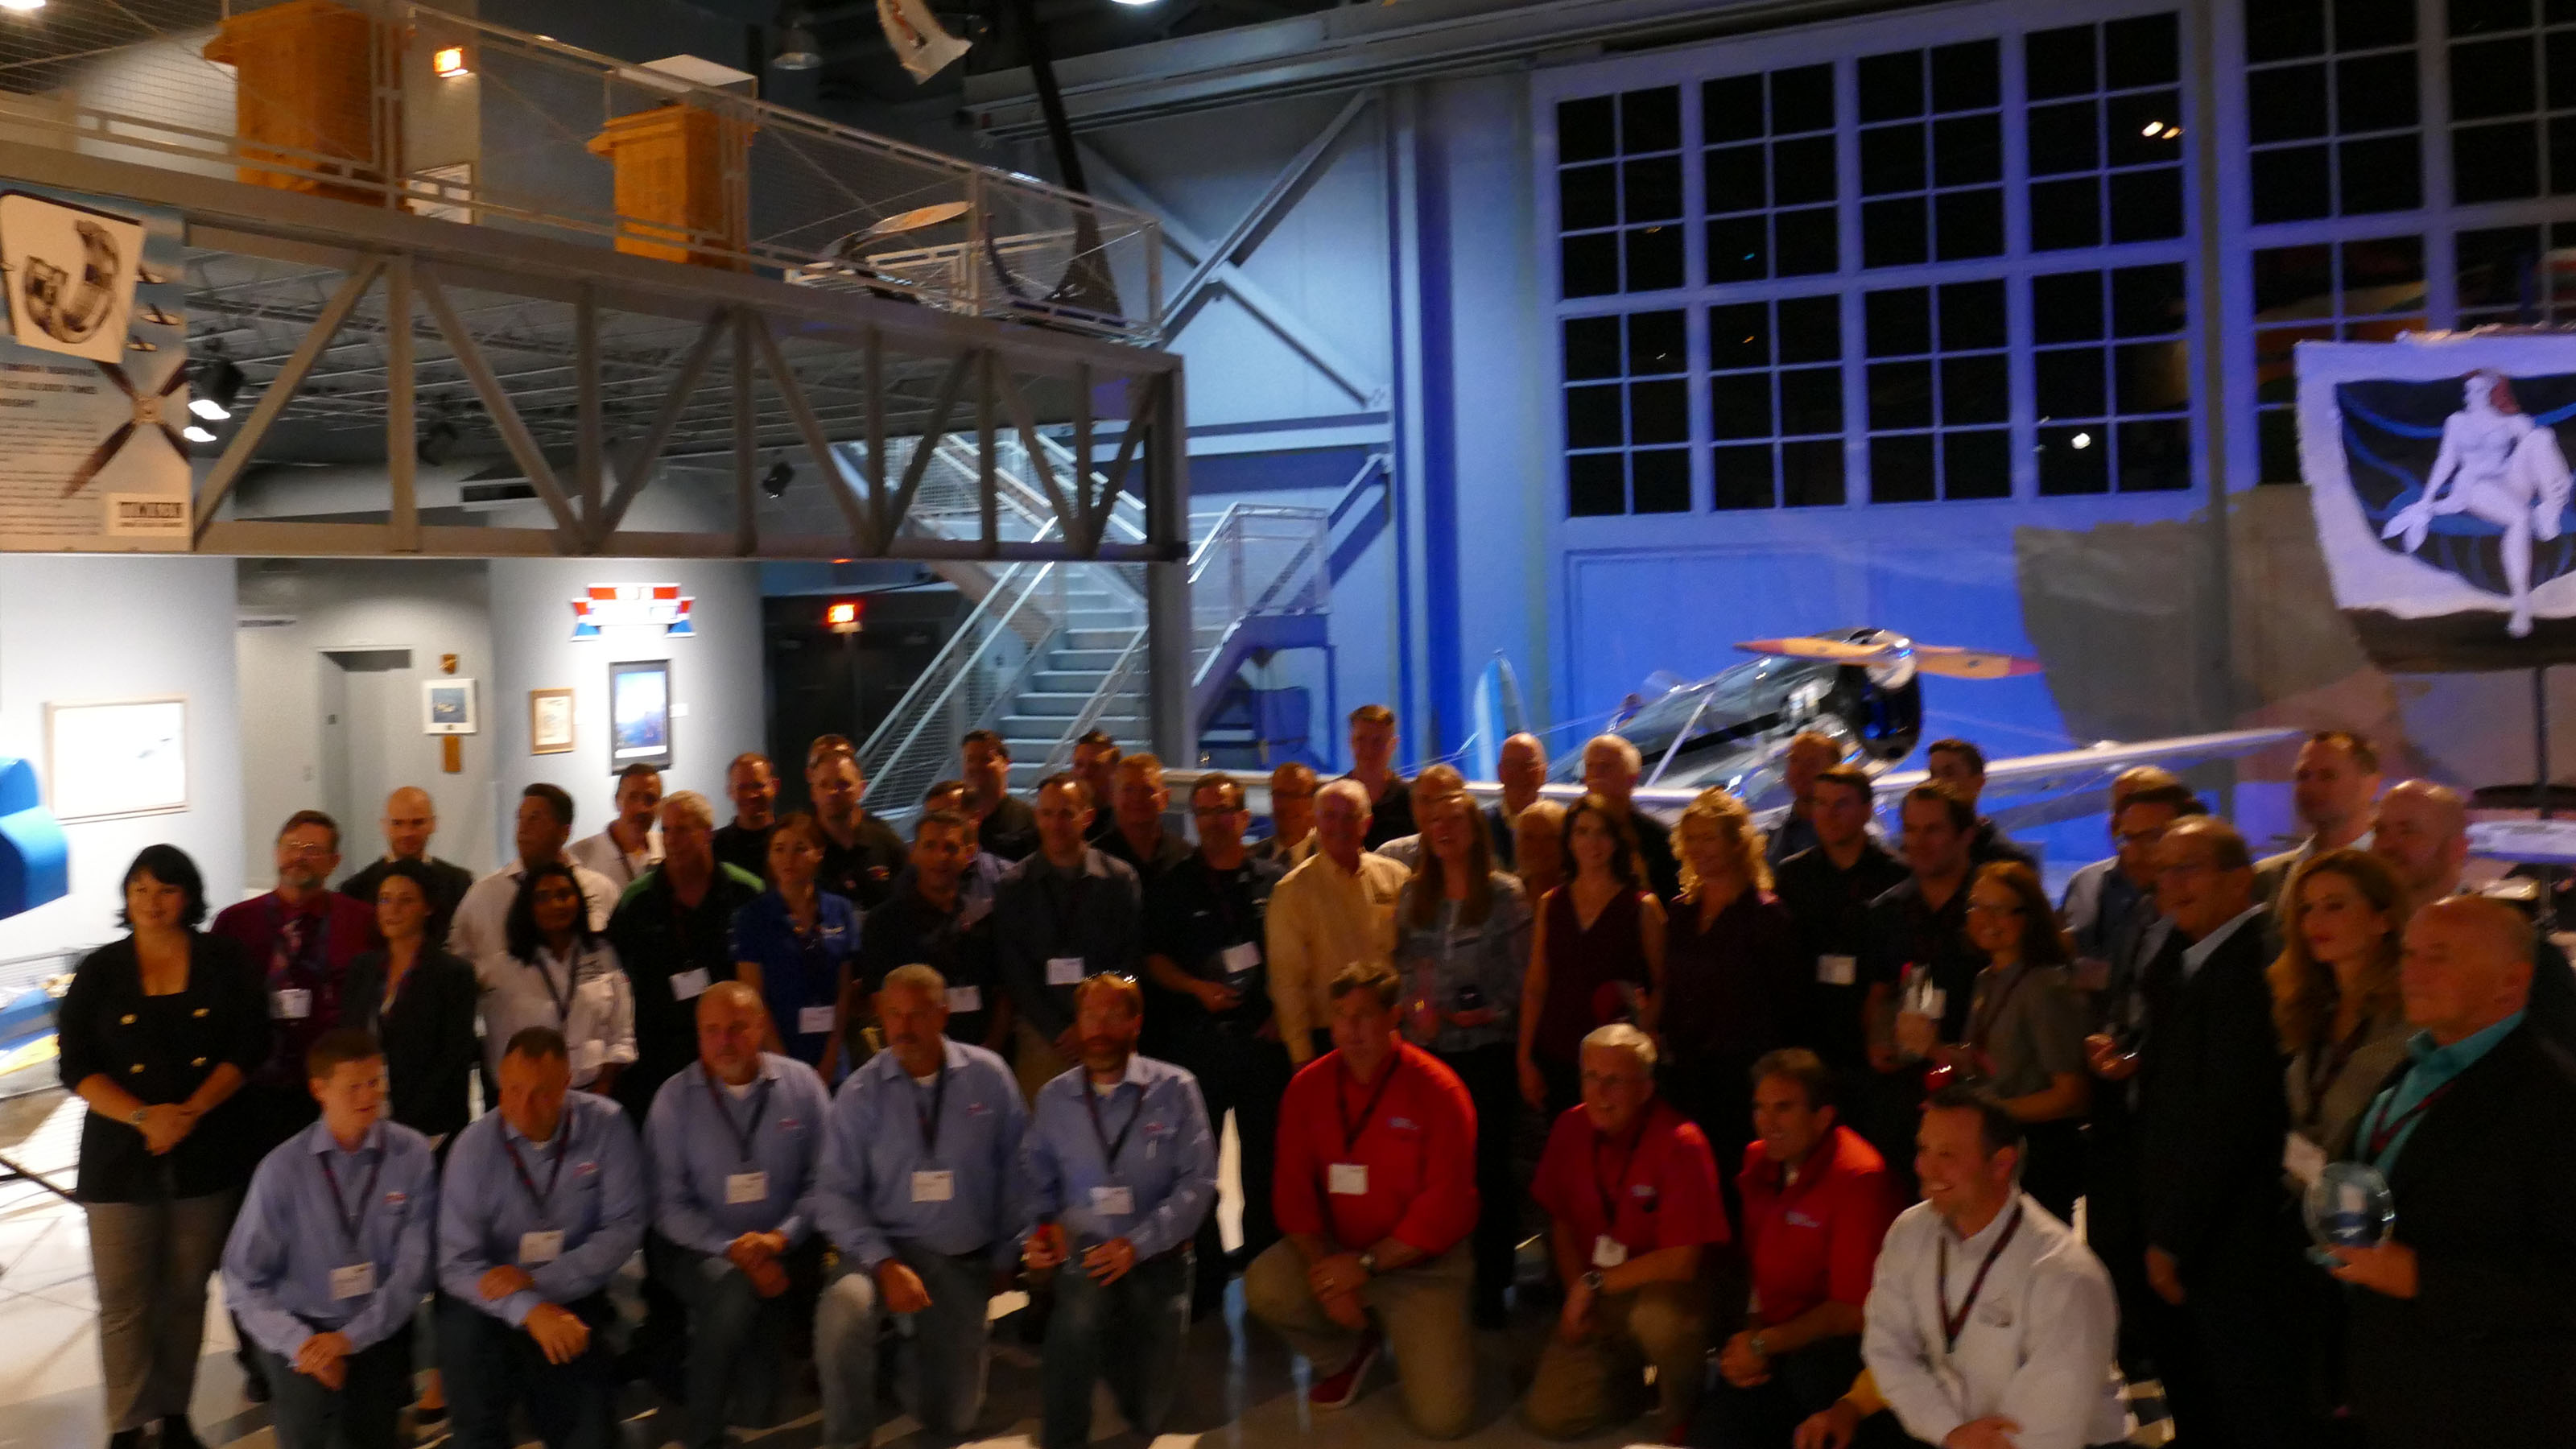 This year's Flight Training Experience Awards were held at EAA's museum in Oshkosh. AOPA announced winners of the best flight school and instructor, as well as regional winners, and distinguished schools and instructors.